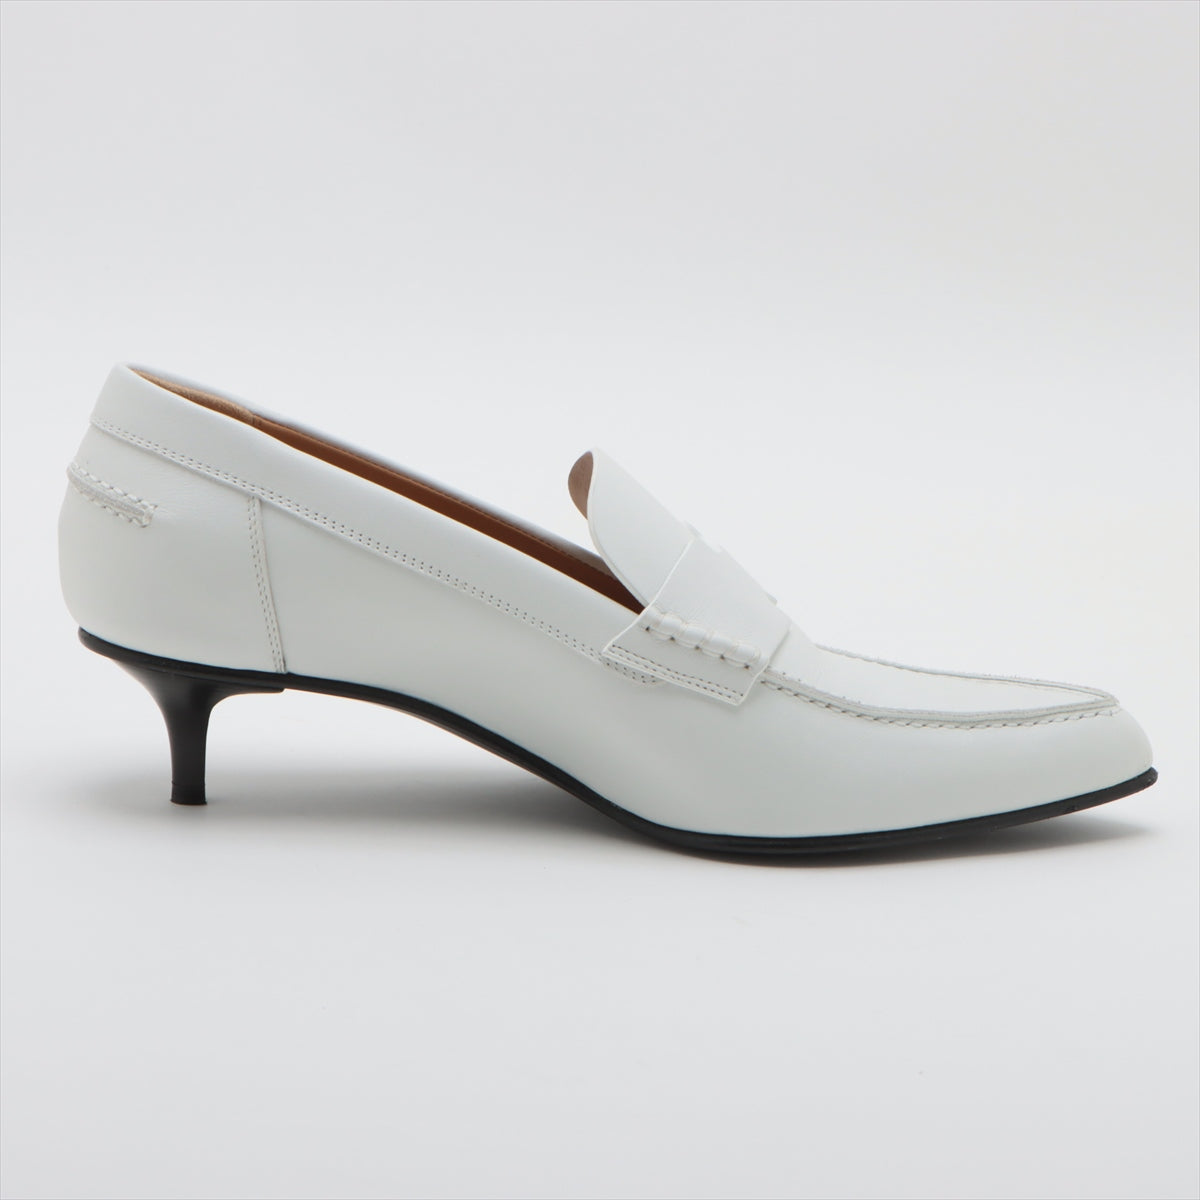 Hermès Glorious Leather Pumps 37.5 Ladies' White with replacement lift box There is a storage bag